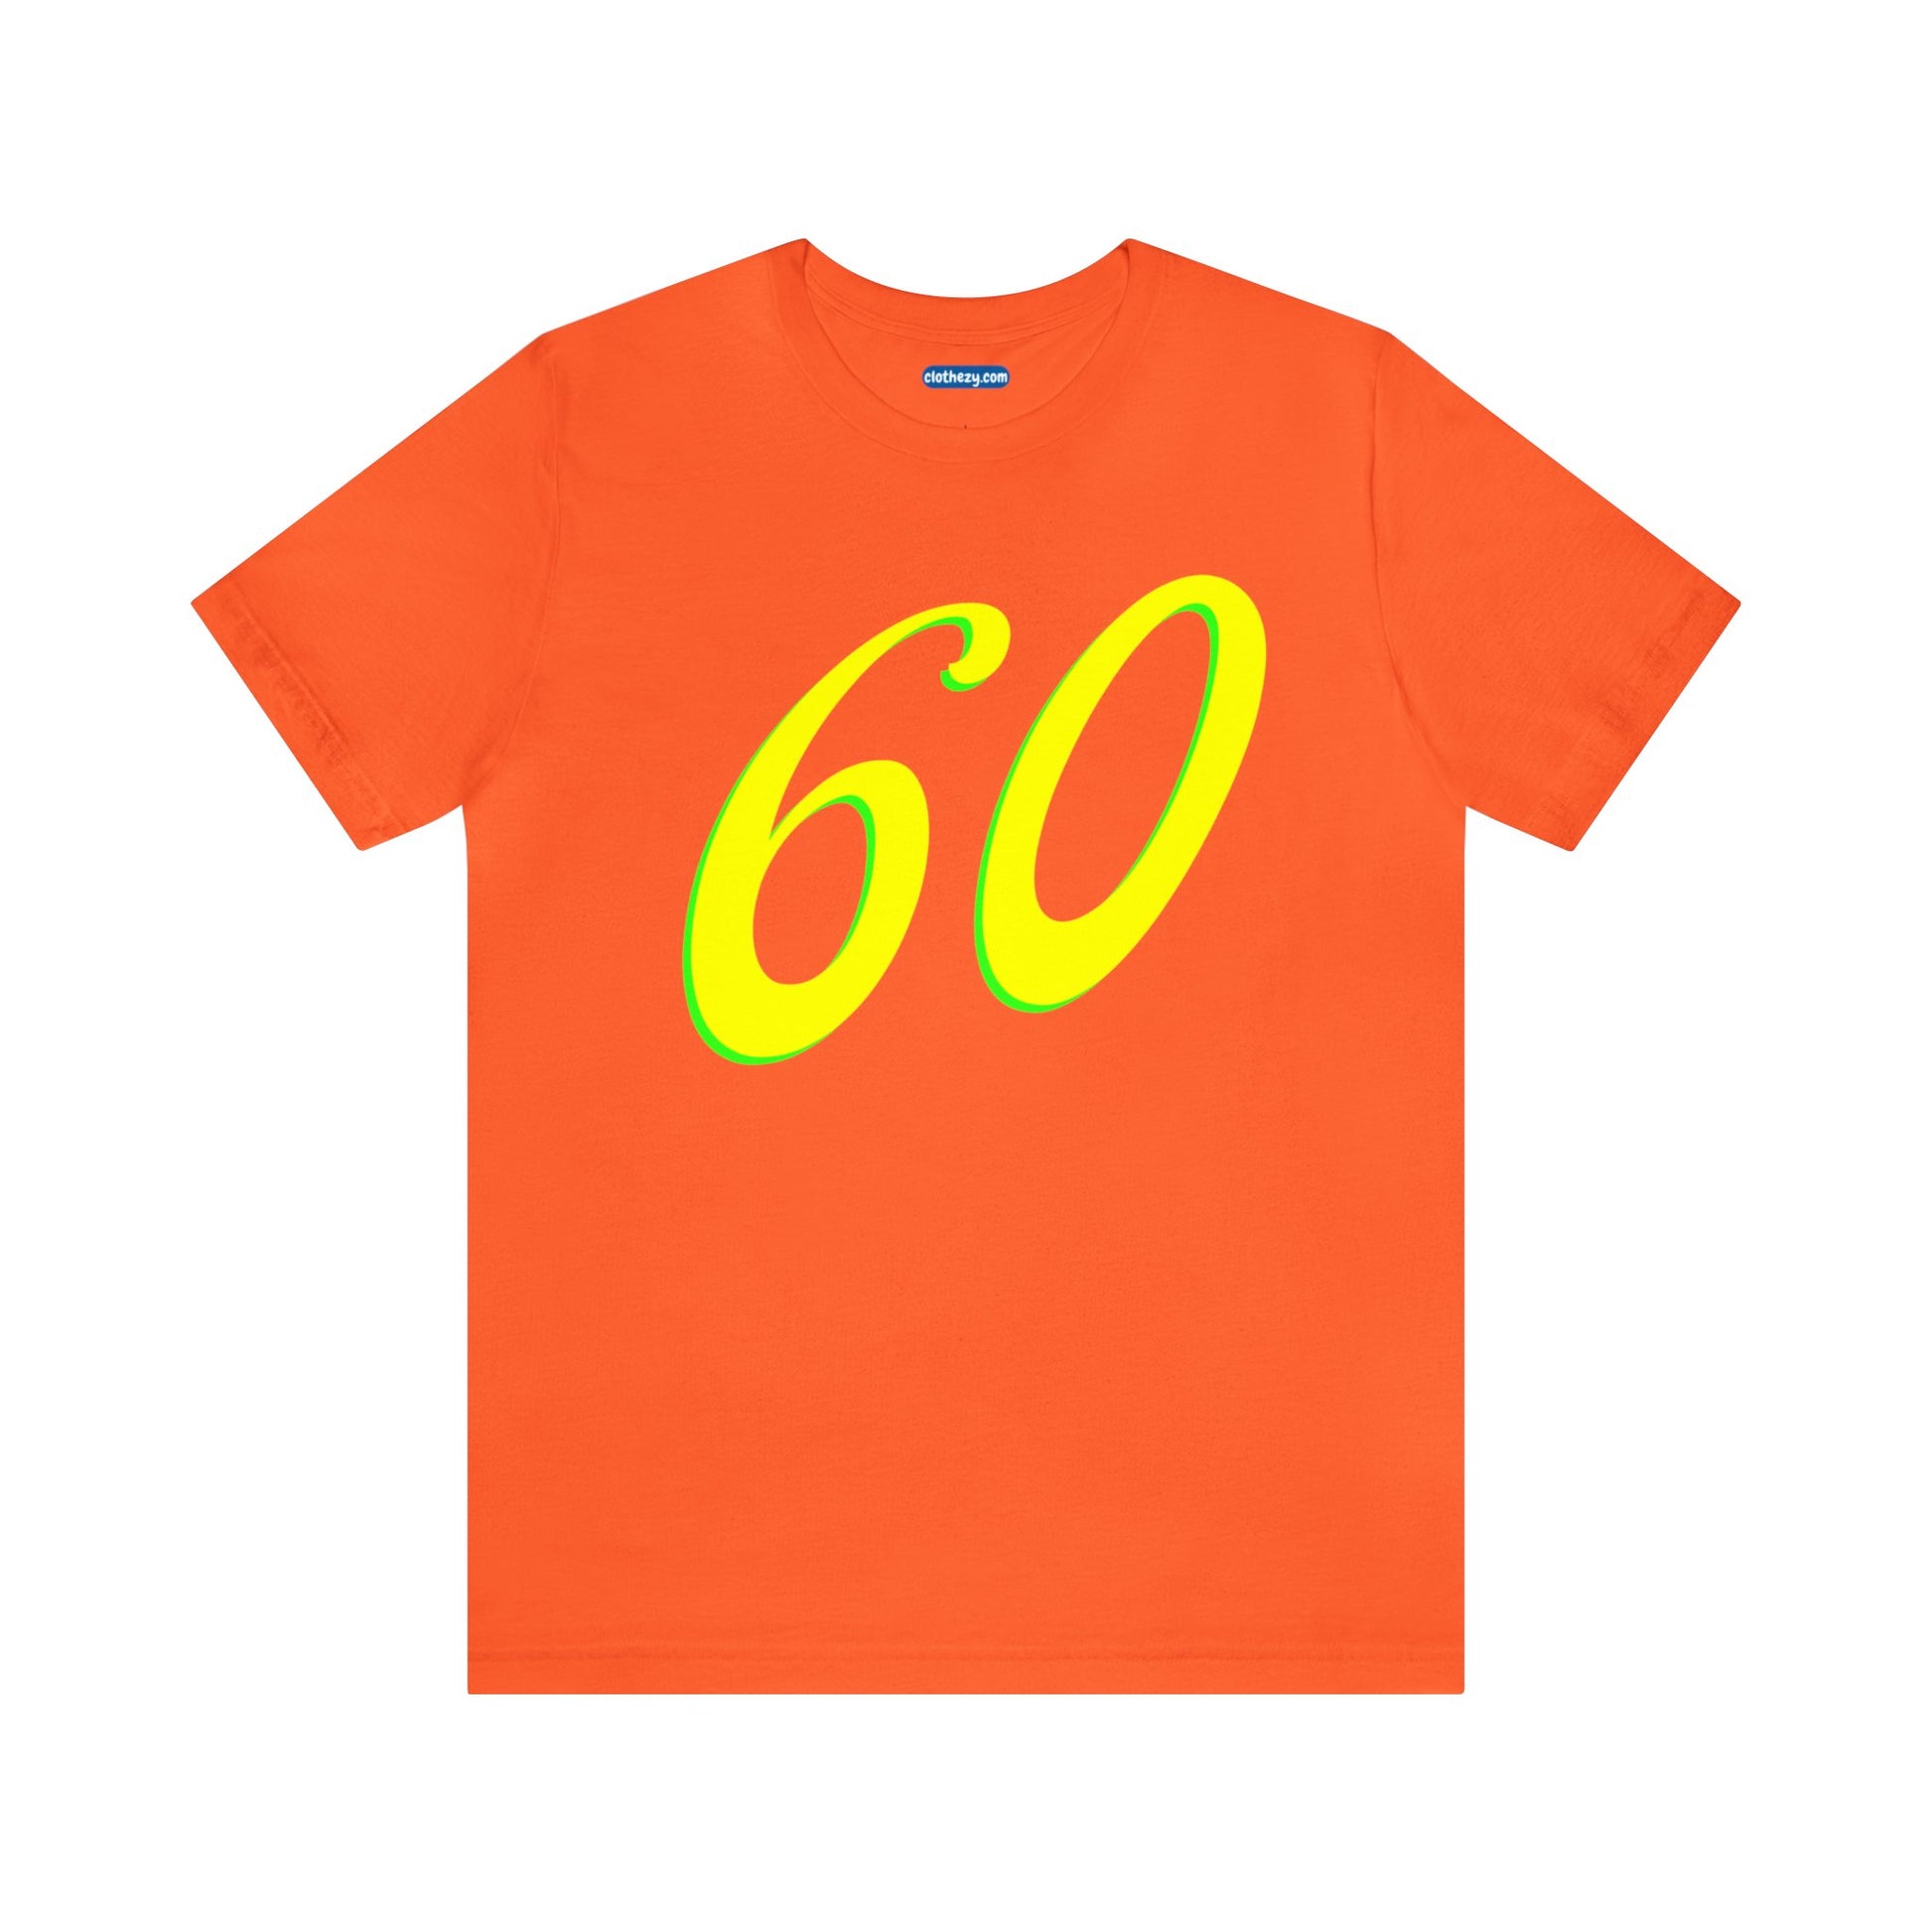 Number 60 Design - Soft Cotton Tee for birthdays and celebrations, Gift for friends and family, Multiple Options by clothezy.com in Orange Size Small - Buy Now